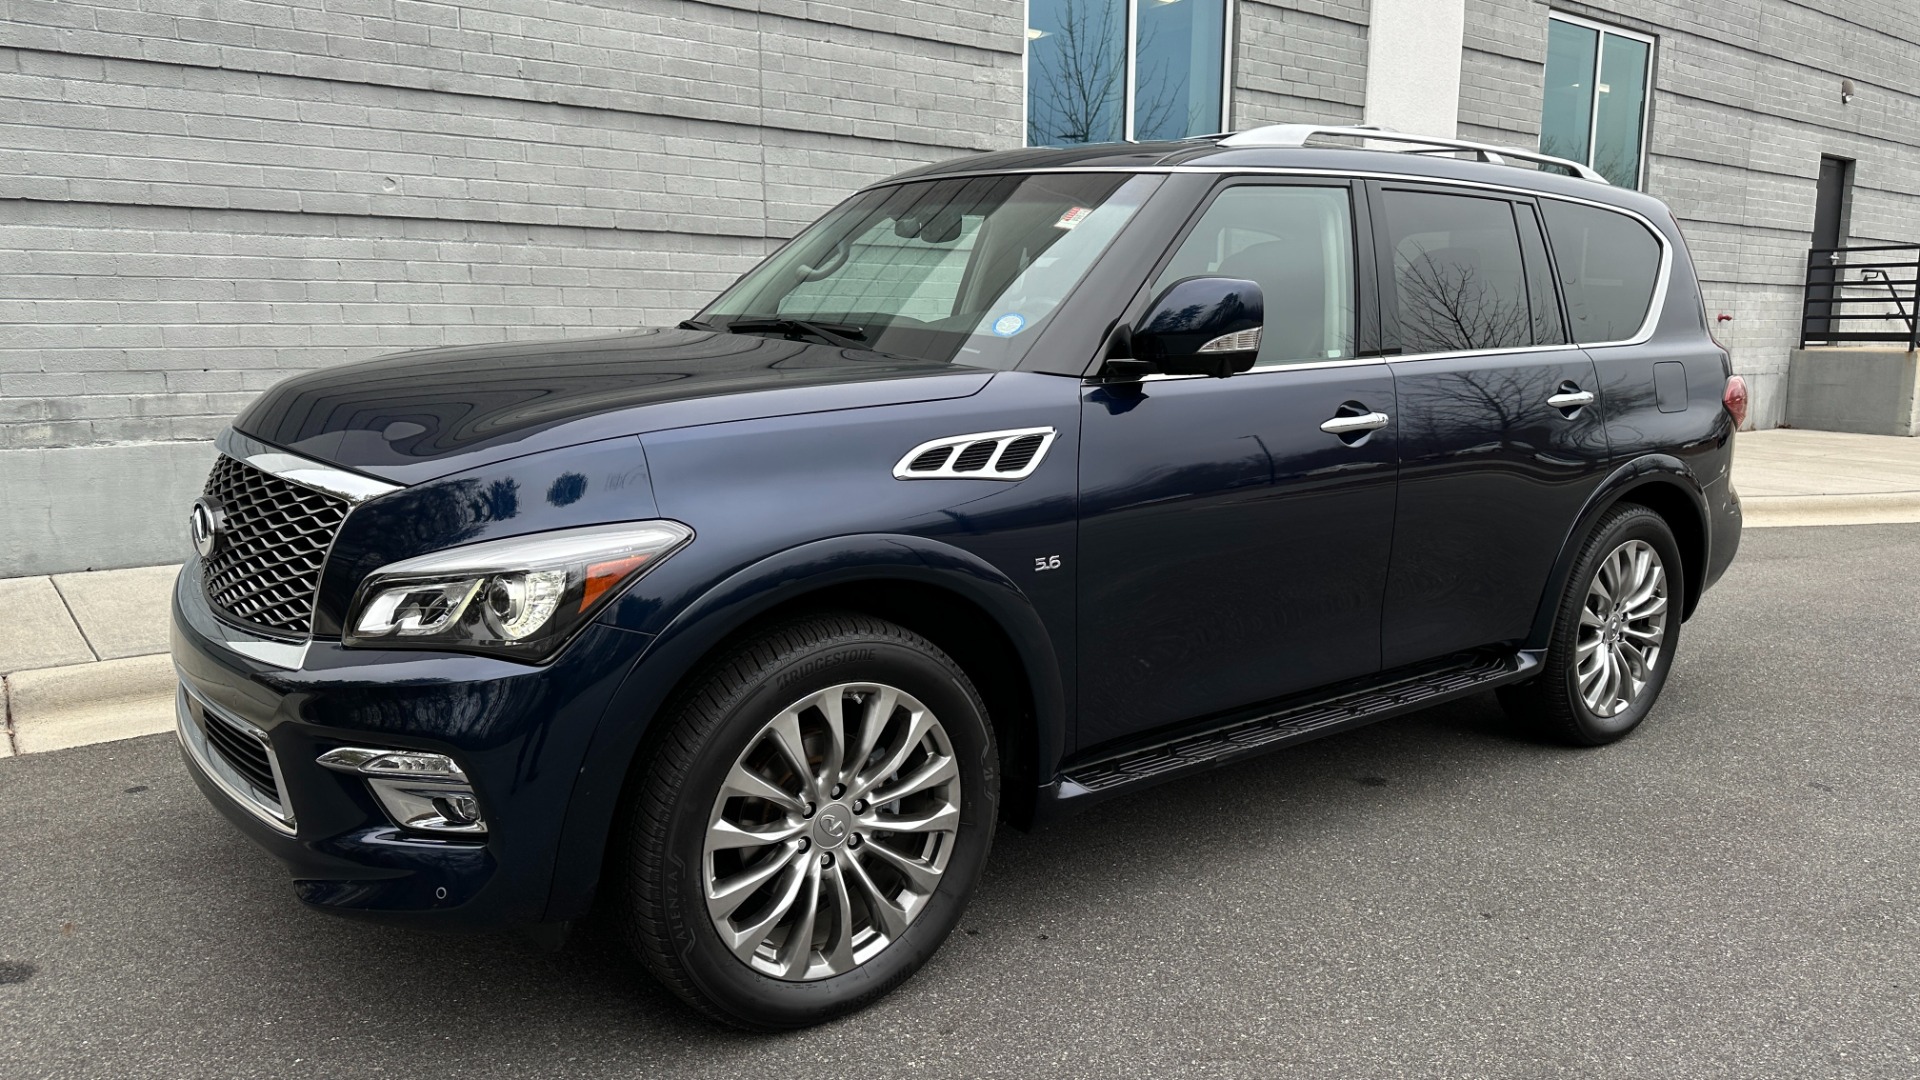 Used 2016 INFINITI QX80 LIMITED / 22IN WHEELS / THEATER PACKAGE / DRIVER ASSISTANCE / V8 / 4WD for sale $33,995 at Formula Imports in Charlotte NC 28227 2